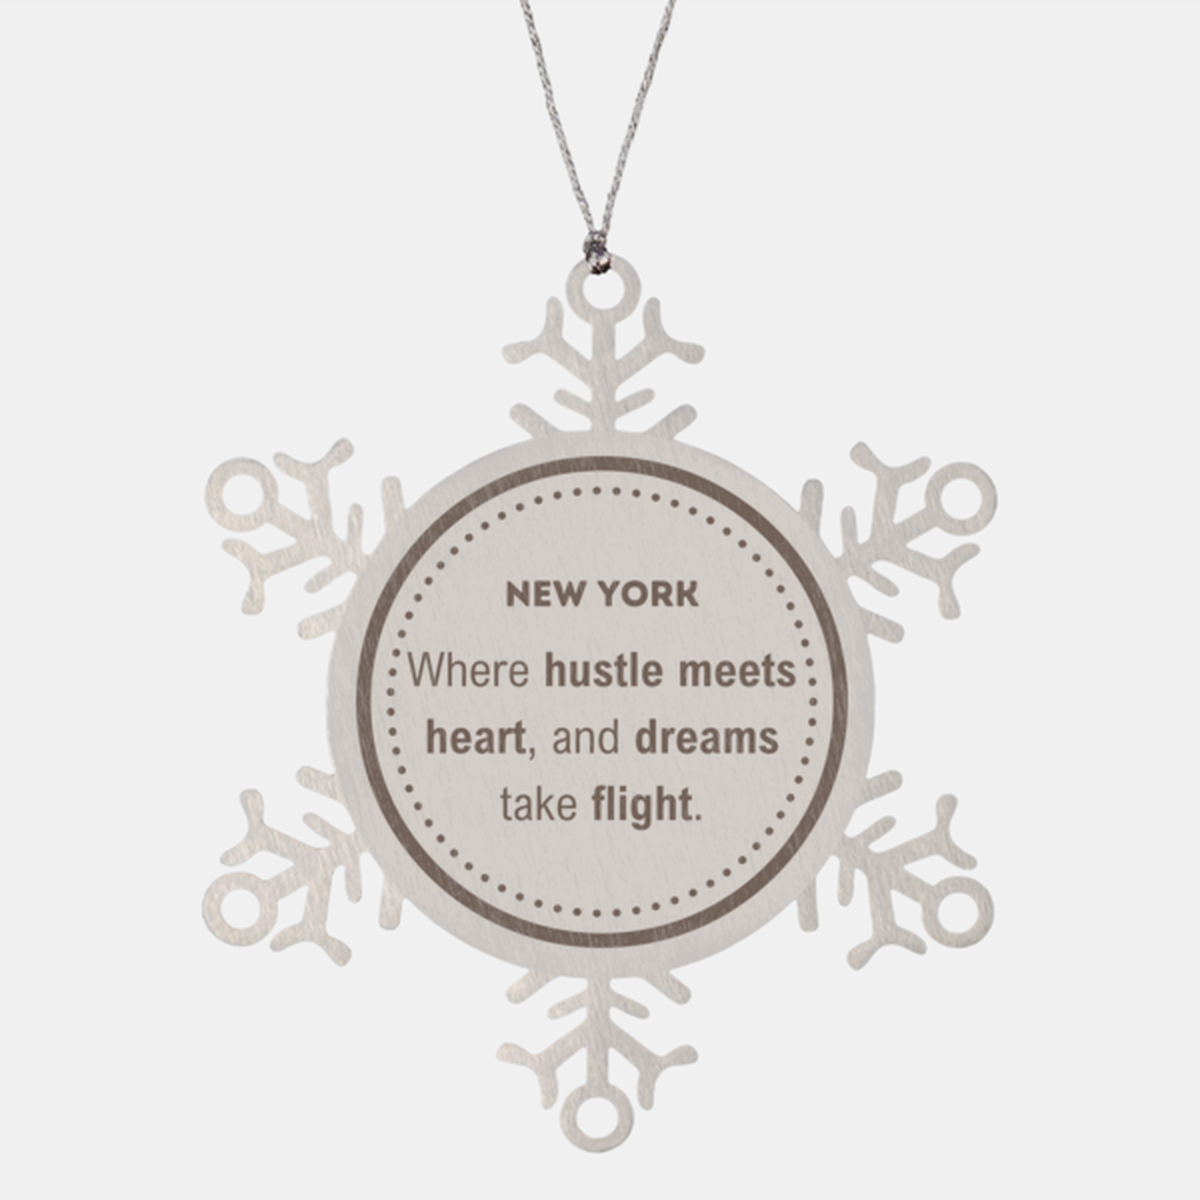 New York: Where hustle meets heart, and dreams take flight, New York Ornament Gifts, Proud New York Christmas New York Snowflake Ornament, New York State People, Men, Women, Friends